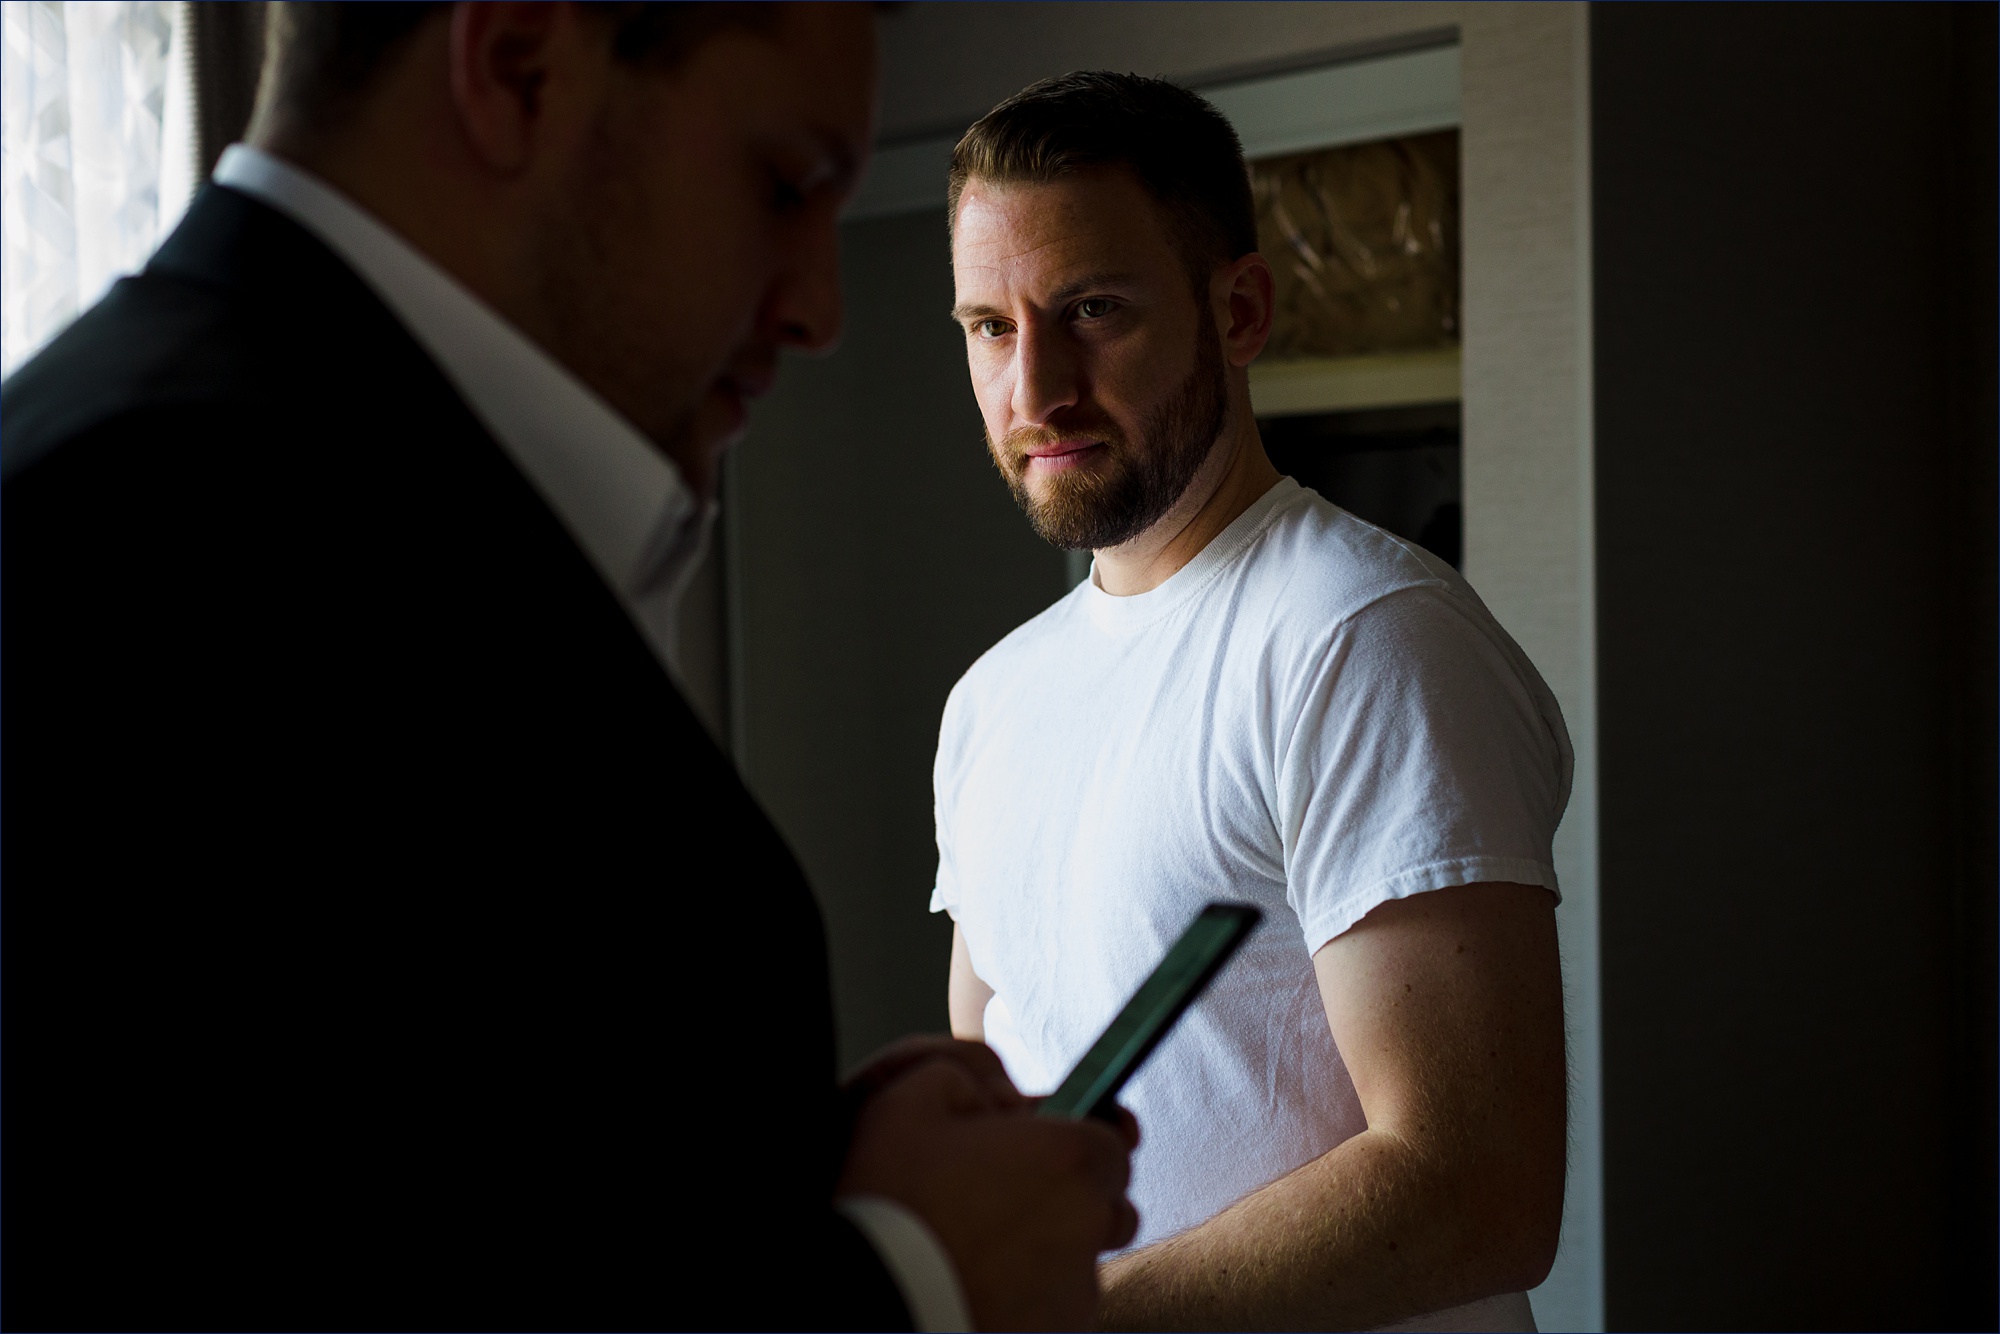 The groom gets ready for the wedding day in New Hampshire